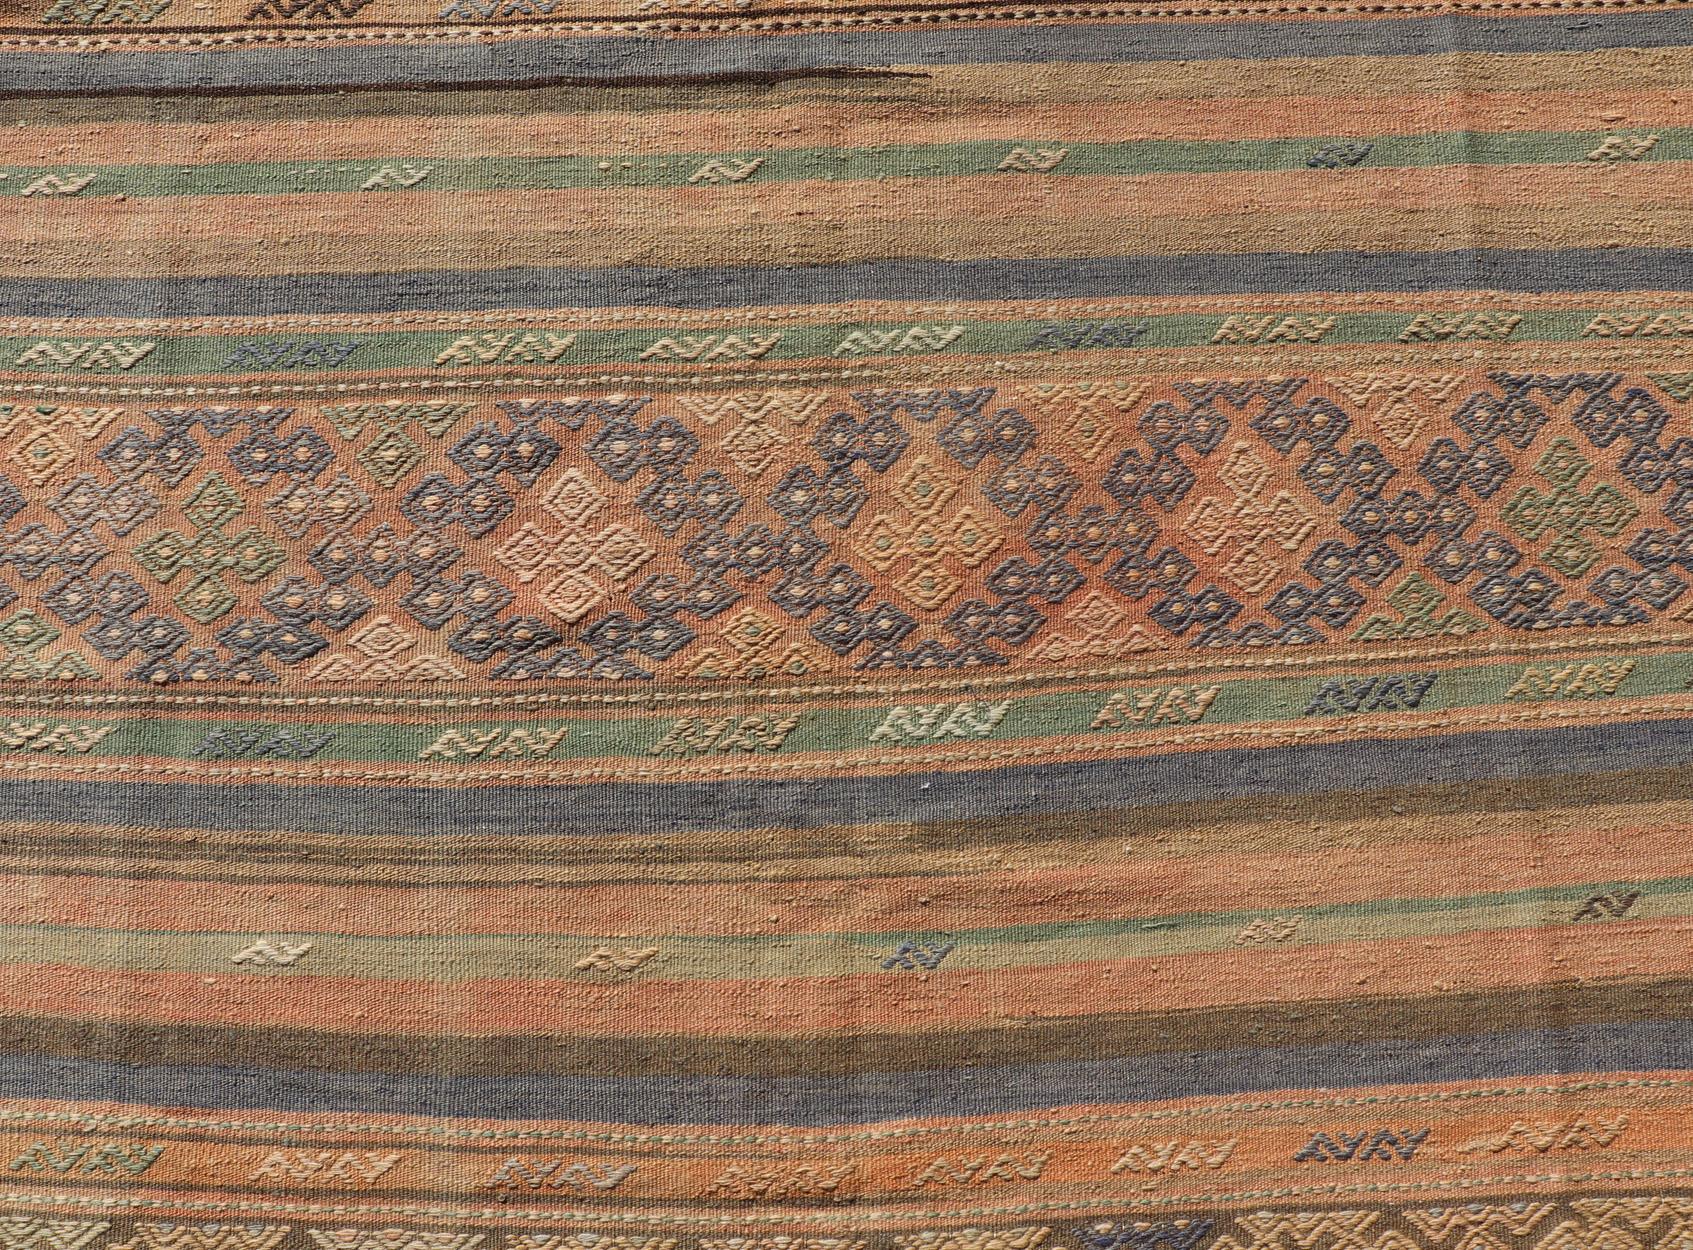 Vintage Striped Turkish Kilim Rug with Geometric Shapes and Soft Muted Colors For Sale 4